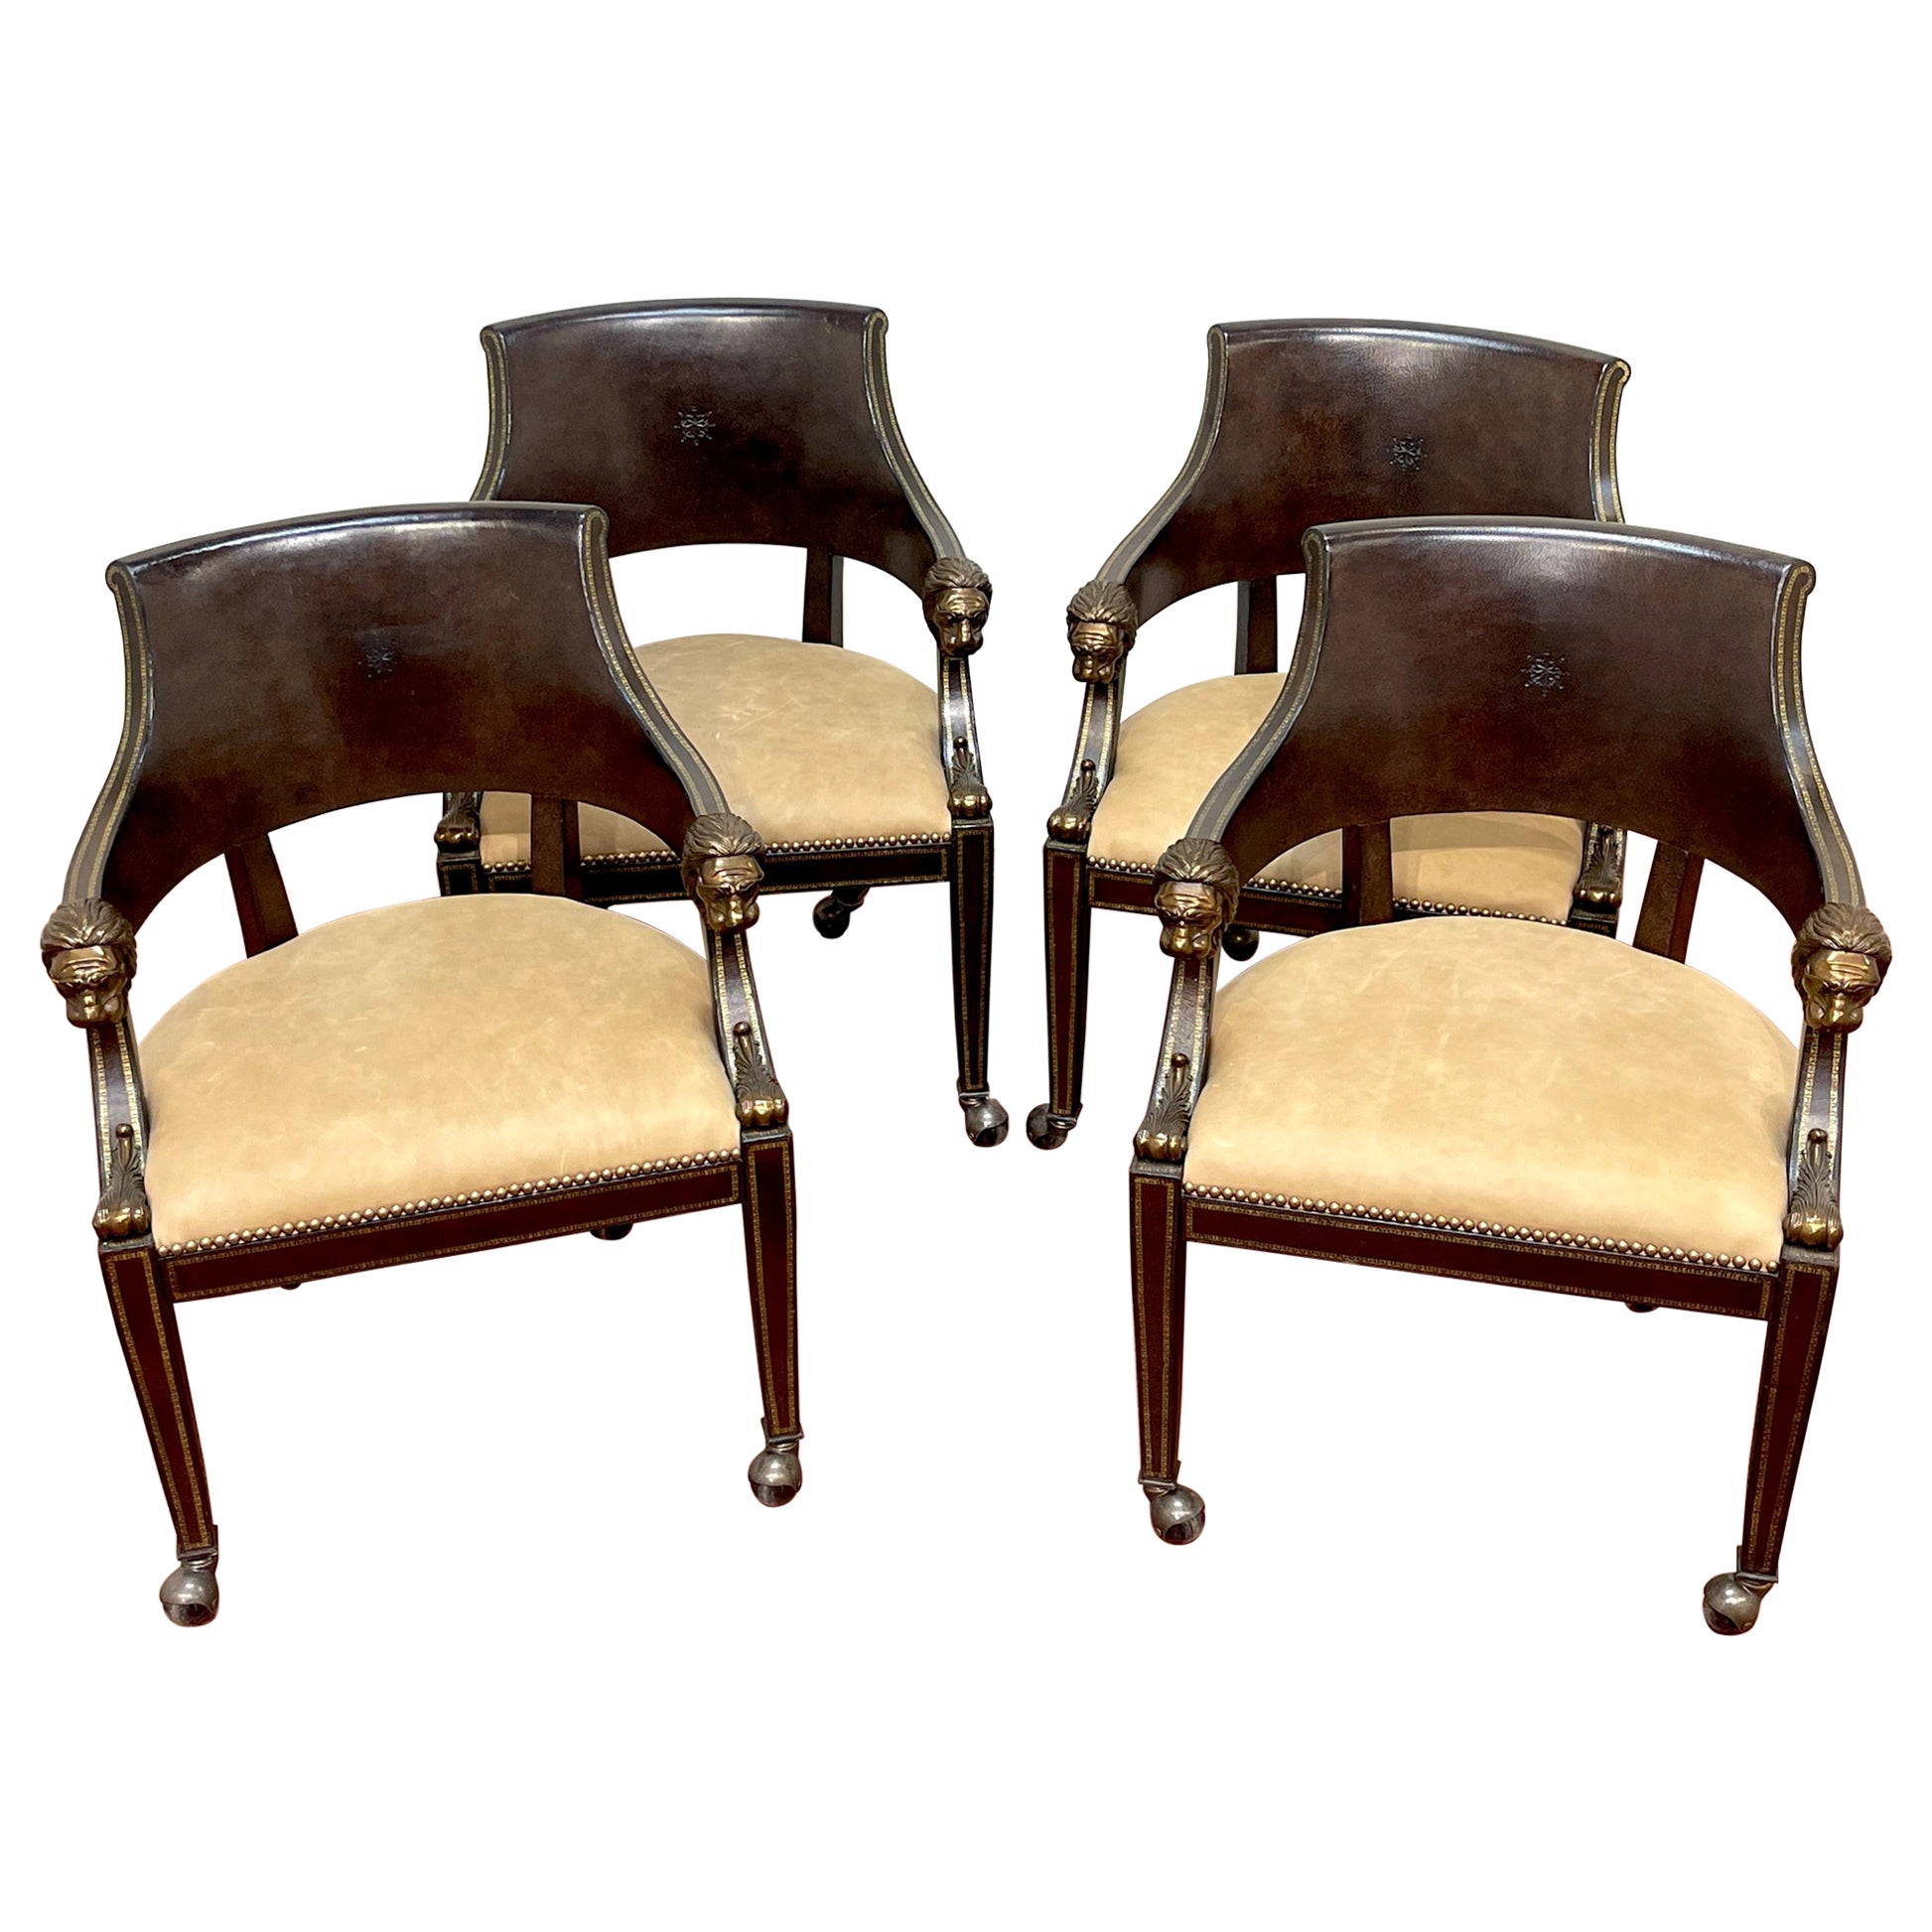 4 Gilt Leather Tooled Bronze Lion Head Armchairs on Castors, By Maitland-Smith